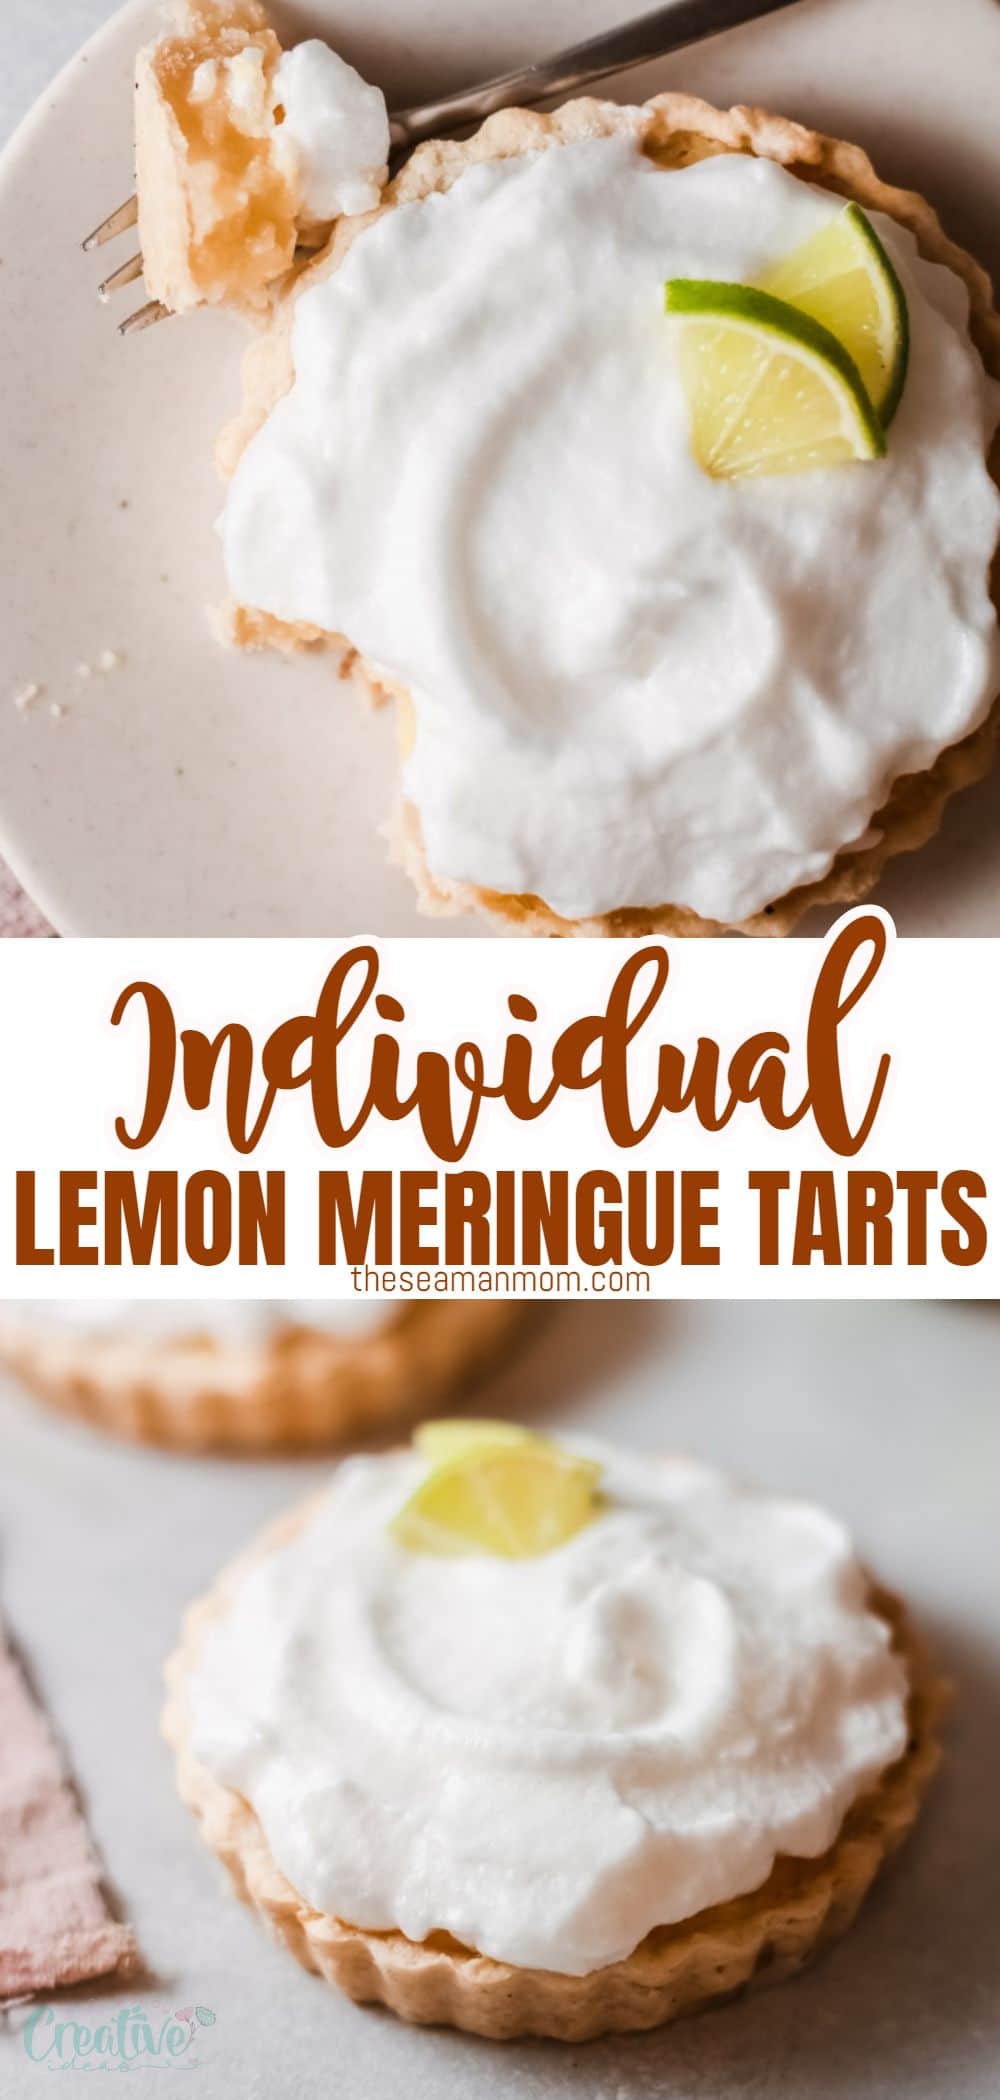 These mini lemon meringue tarts are zesty and creamy! Made with a delicate and buttery pie crust and stuffed with an incredibly delicious lemon cream filling, these mini lemon tarts are topped with an airy meringue and fresh lemon slices. Serve them anytime you are craving a light dessert! via @petroneagu